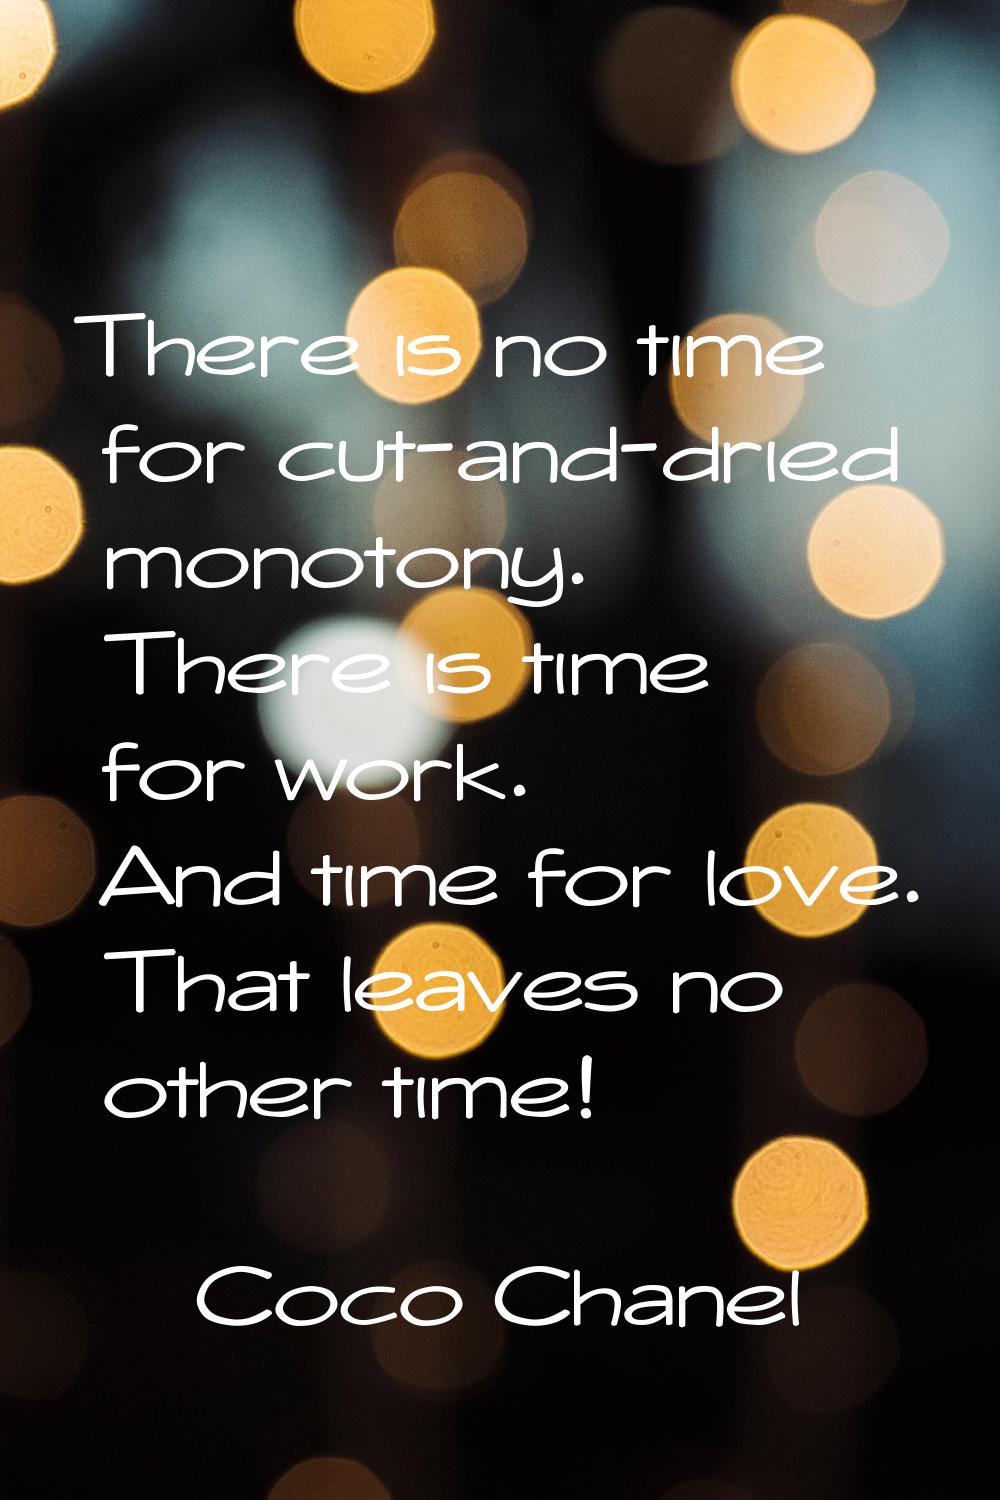 There is no time for cut-and-dried monotony. There is time for work. And time for love. That leaves